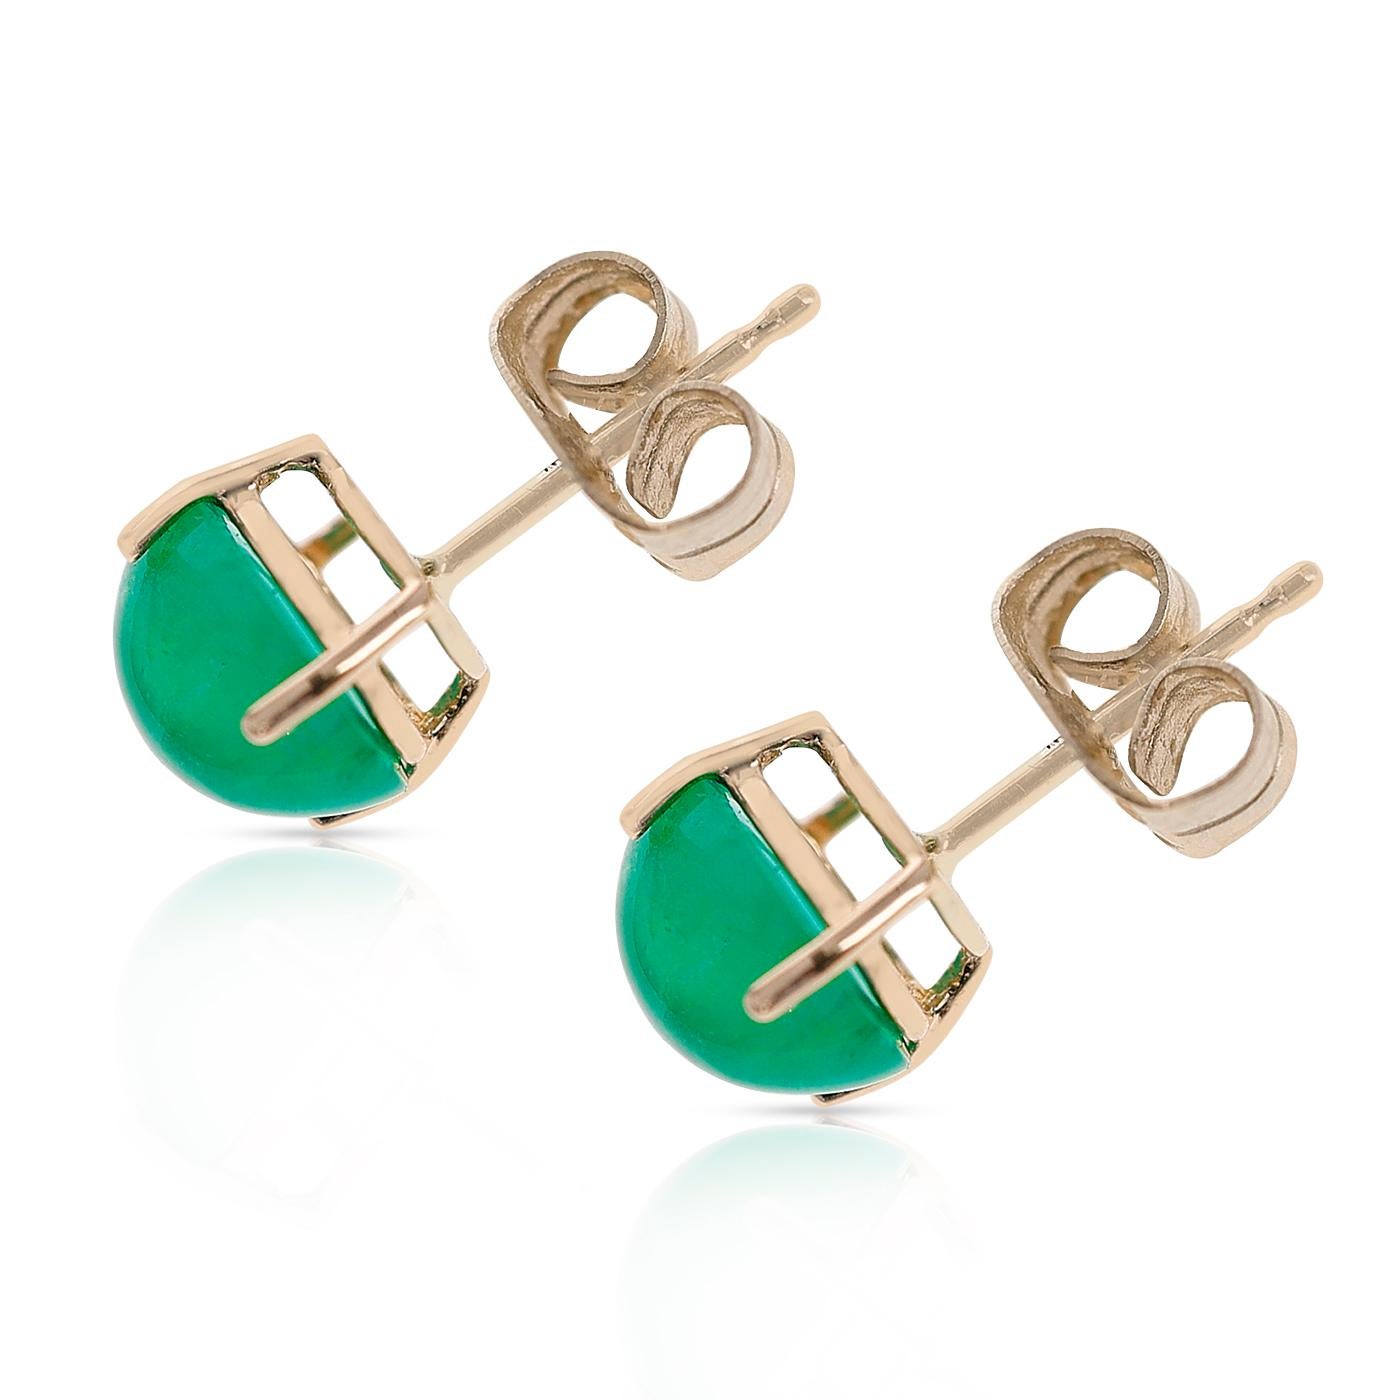 Oval Cut Emerald Oval Cabochon Stud Earrings Made in 14 Karat Yellow Gold